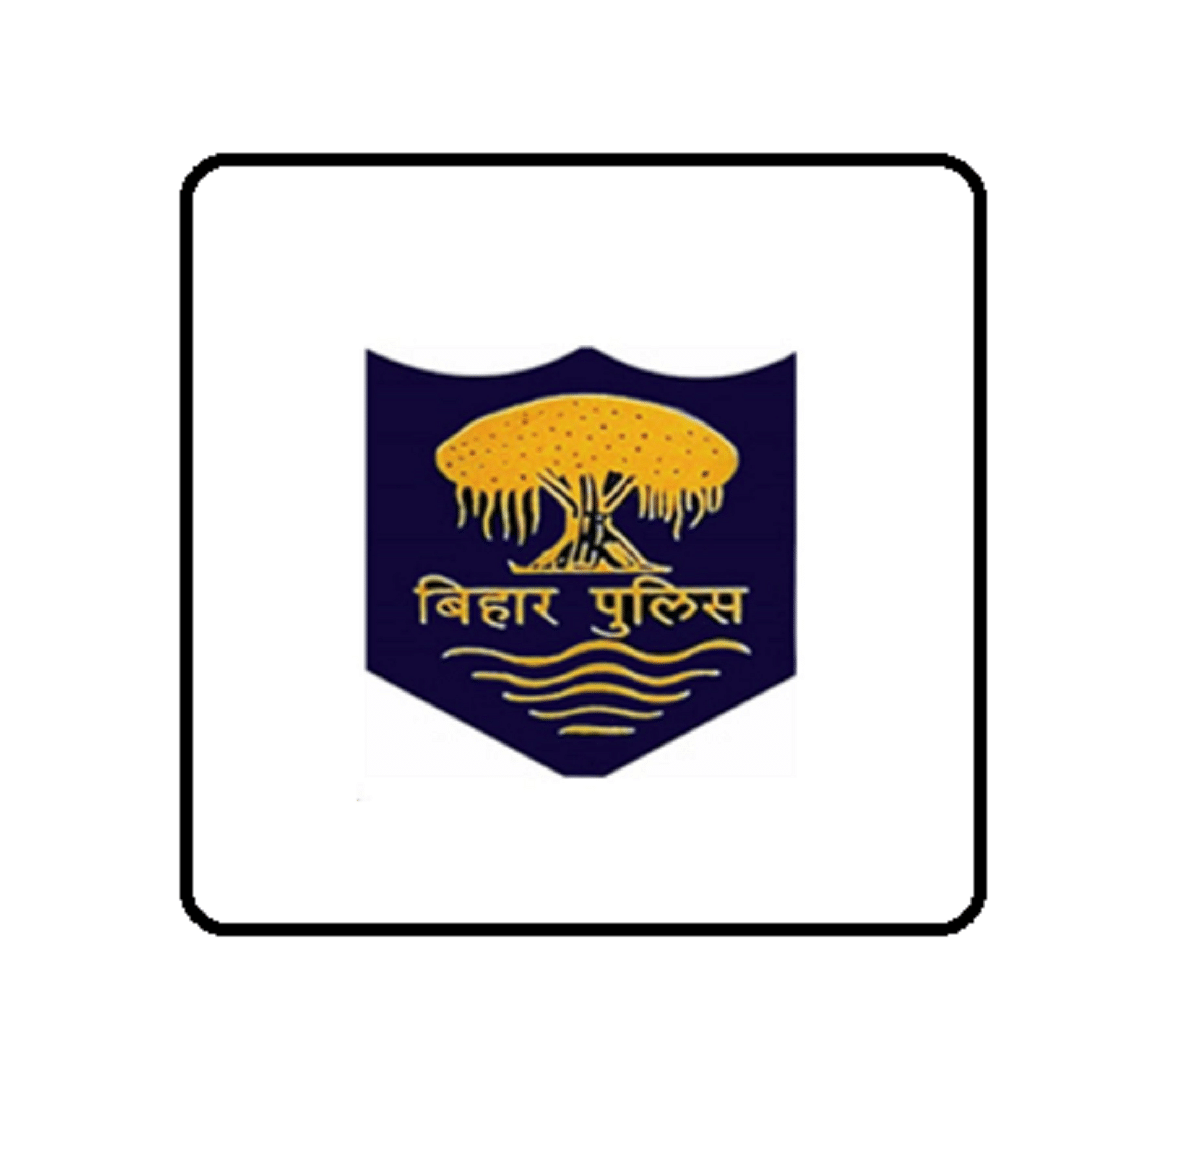 Bihar Police ASI Steno 2020 Admit Card Released, Download with Direct Link